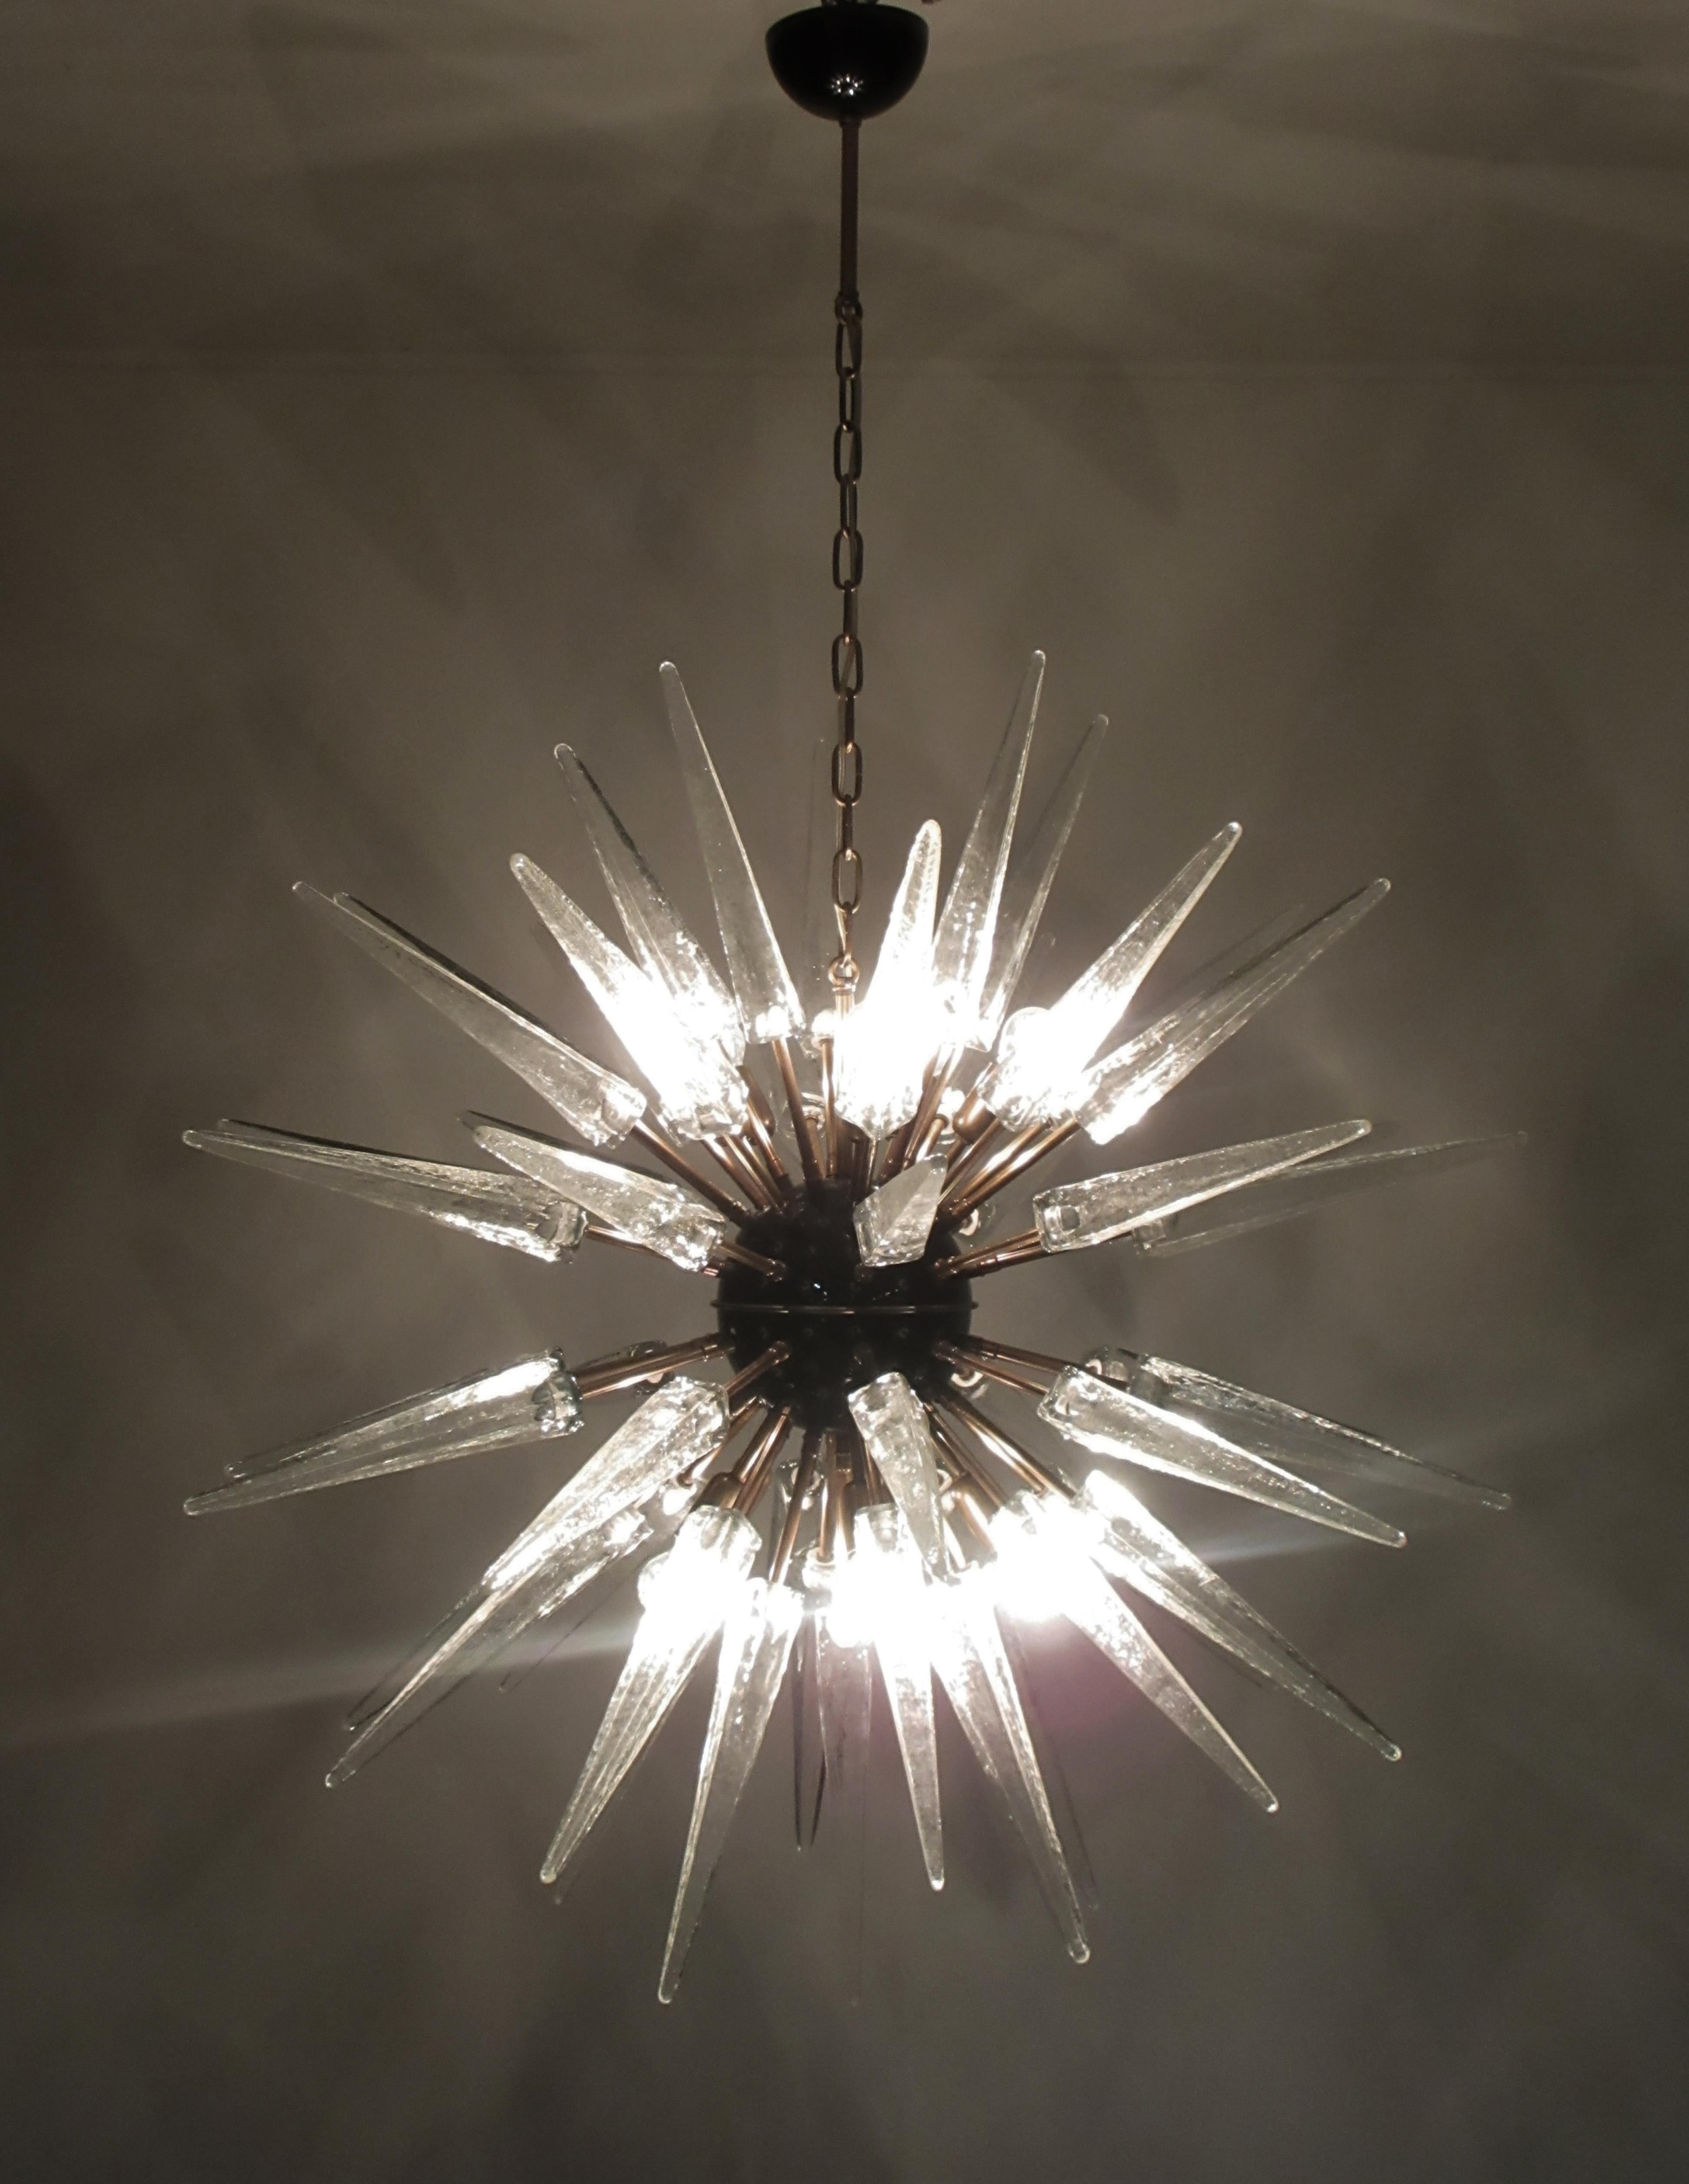 Italian Sputnik chandelier in a black and brass metal, 51 unobtainable transparent glass tips. Murano blown glass in a traditional way. 10 light points.
Period: late 20th century
Dimensions: 55,10 inches (140 cm) height with chain; 37,40 inches